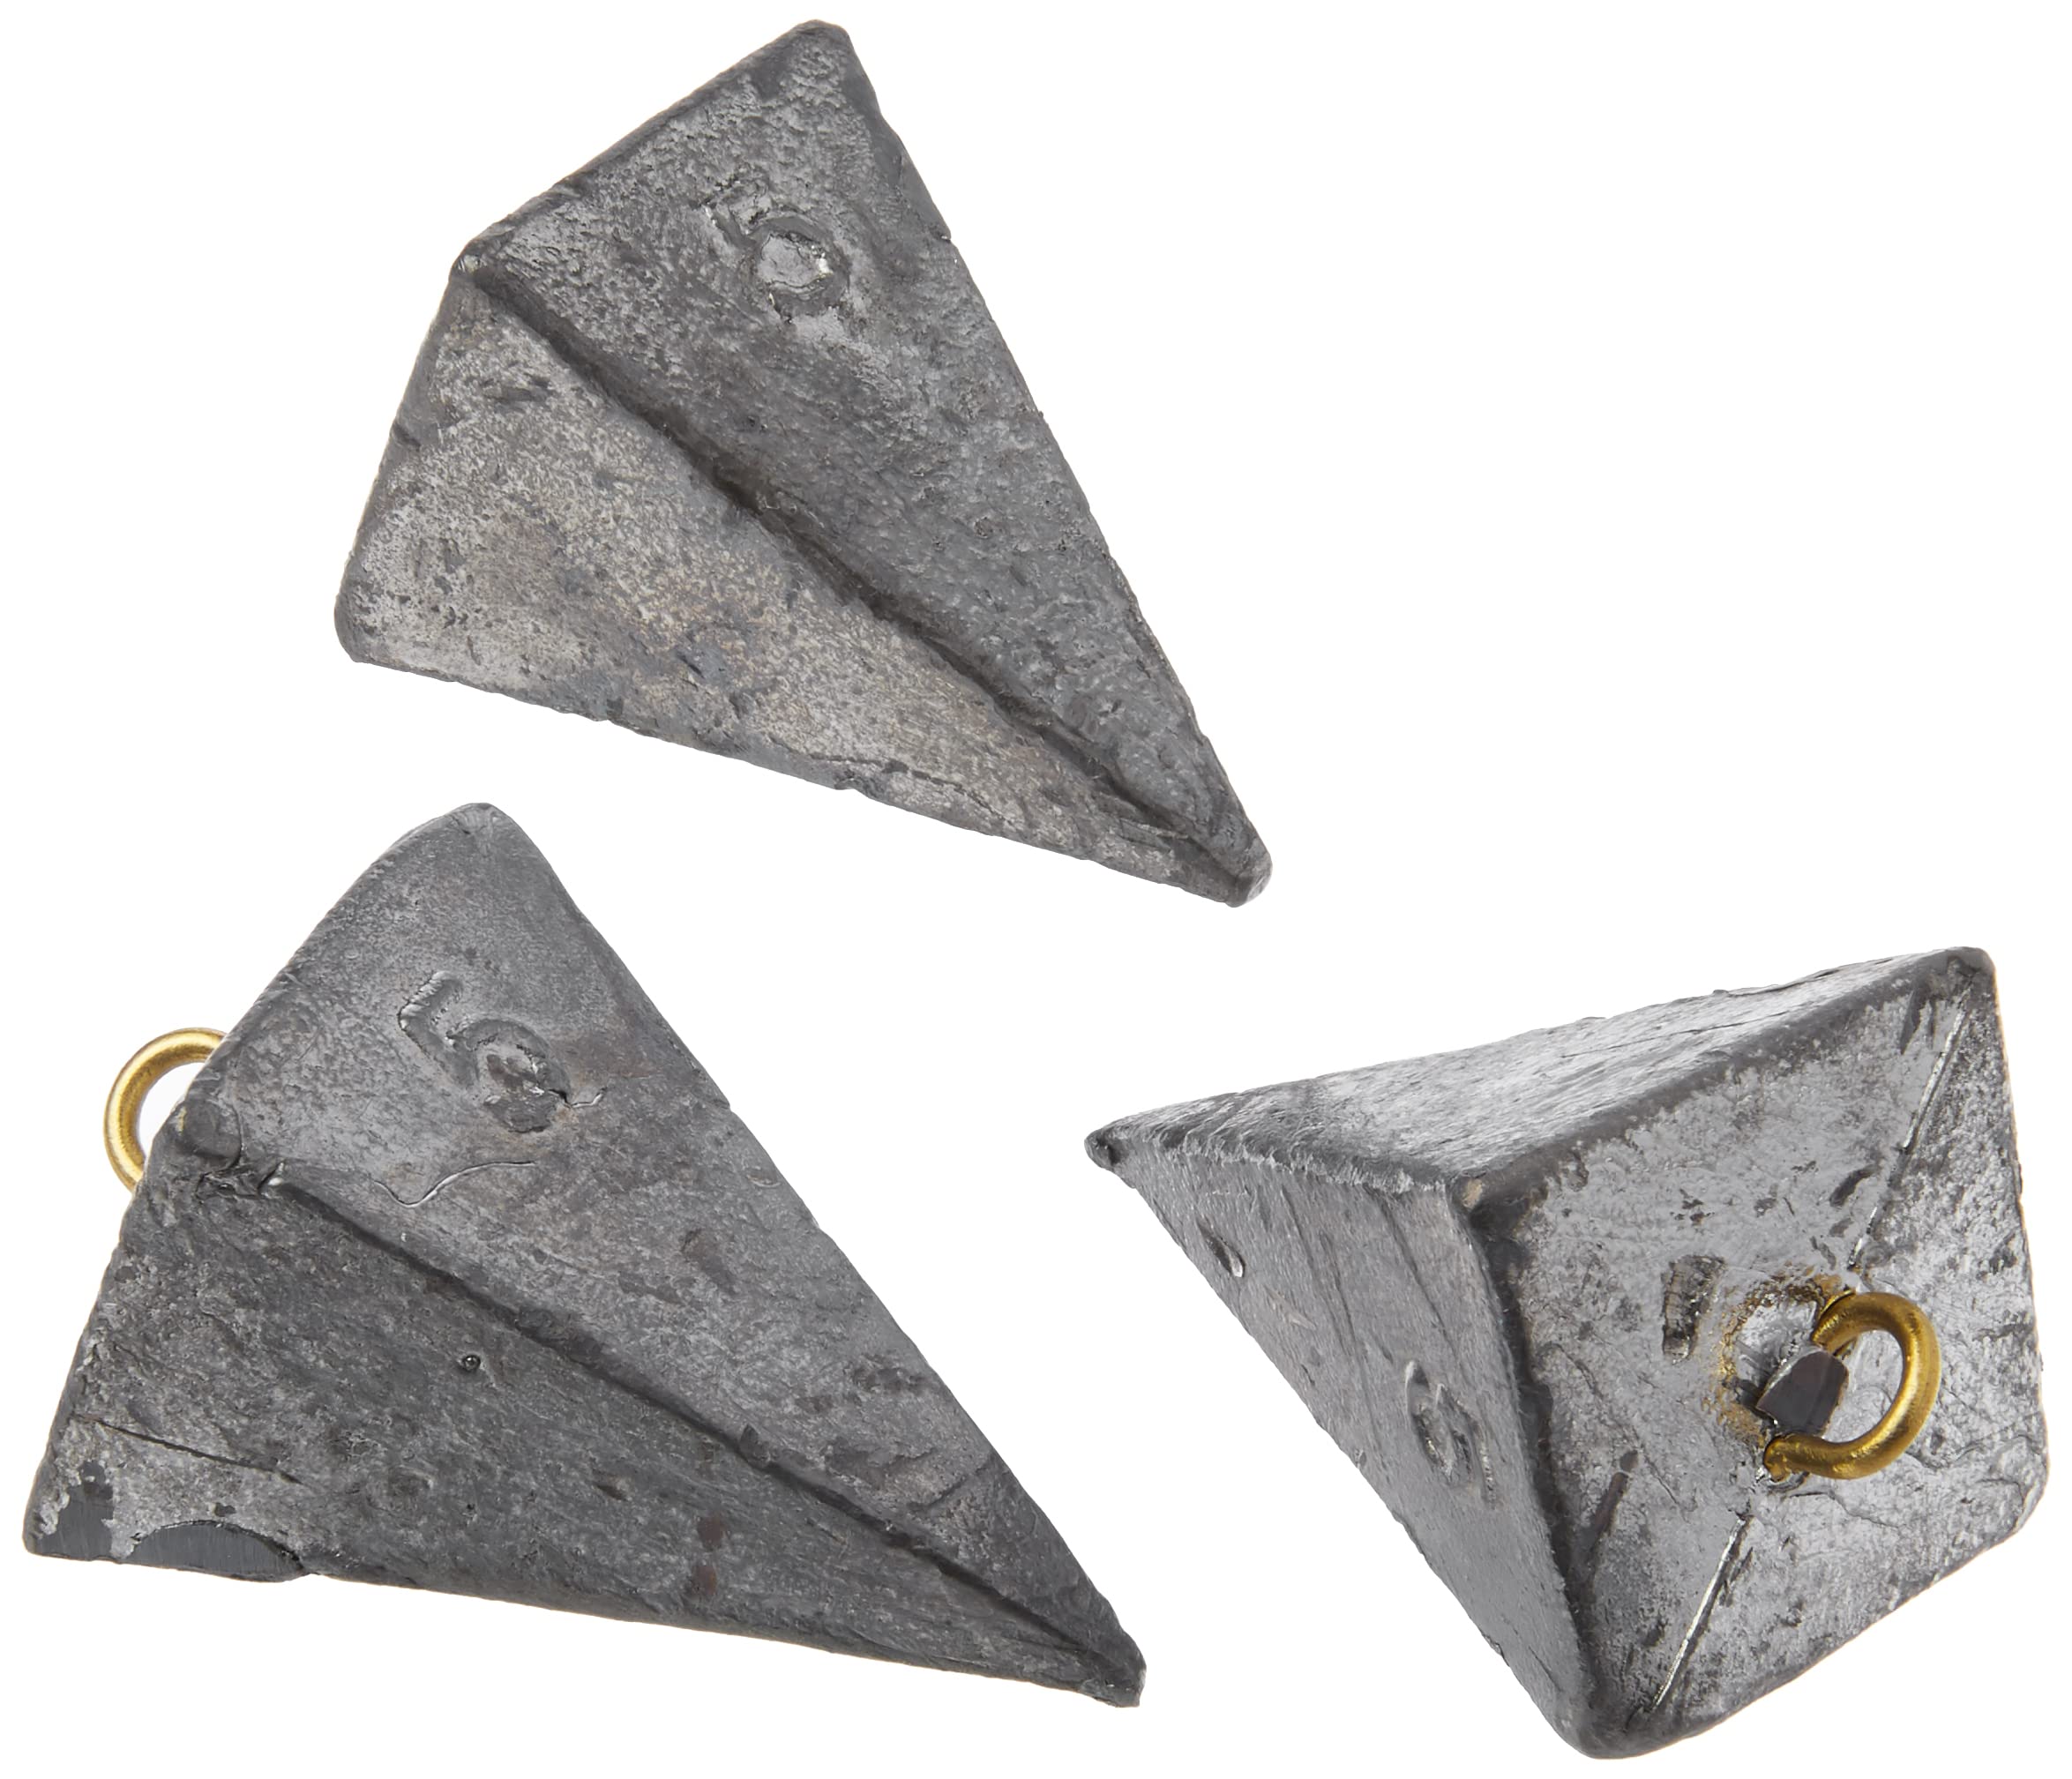  Pyramid Sinkers Fishing Weights, Bullet Fishing